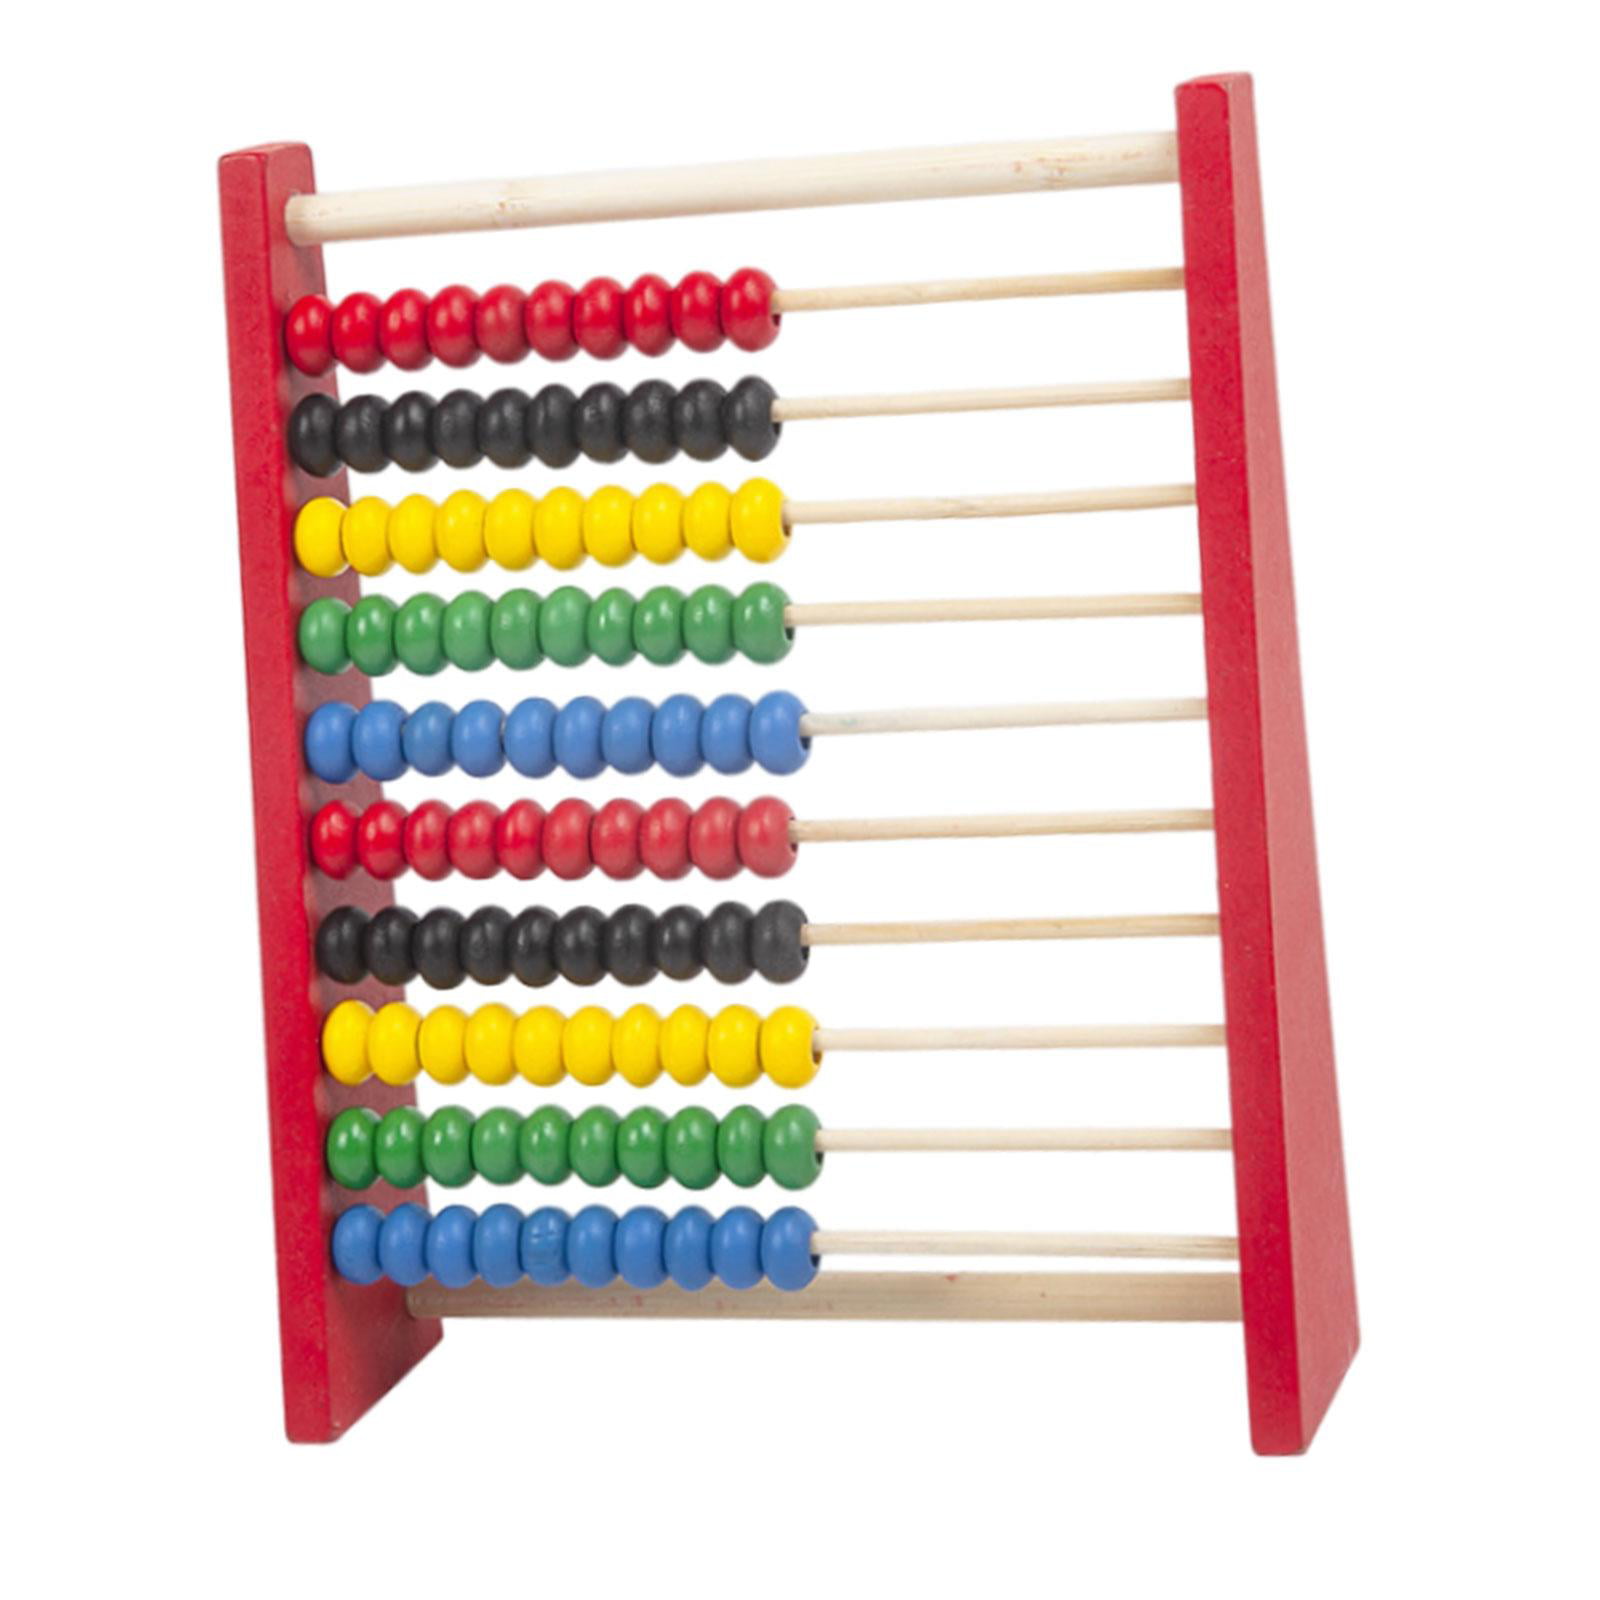 Colorful Abacus Beads Counting Toy 10 Rows Abacus Learn Math